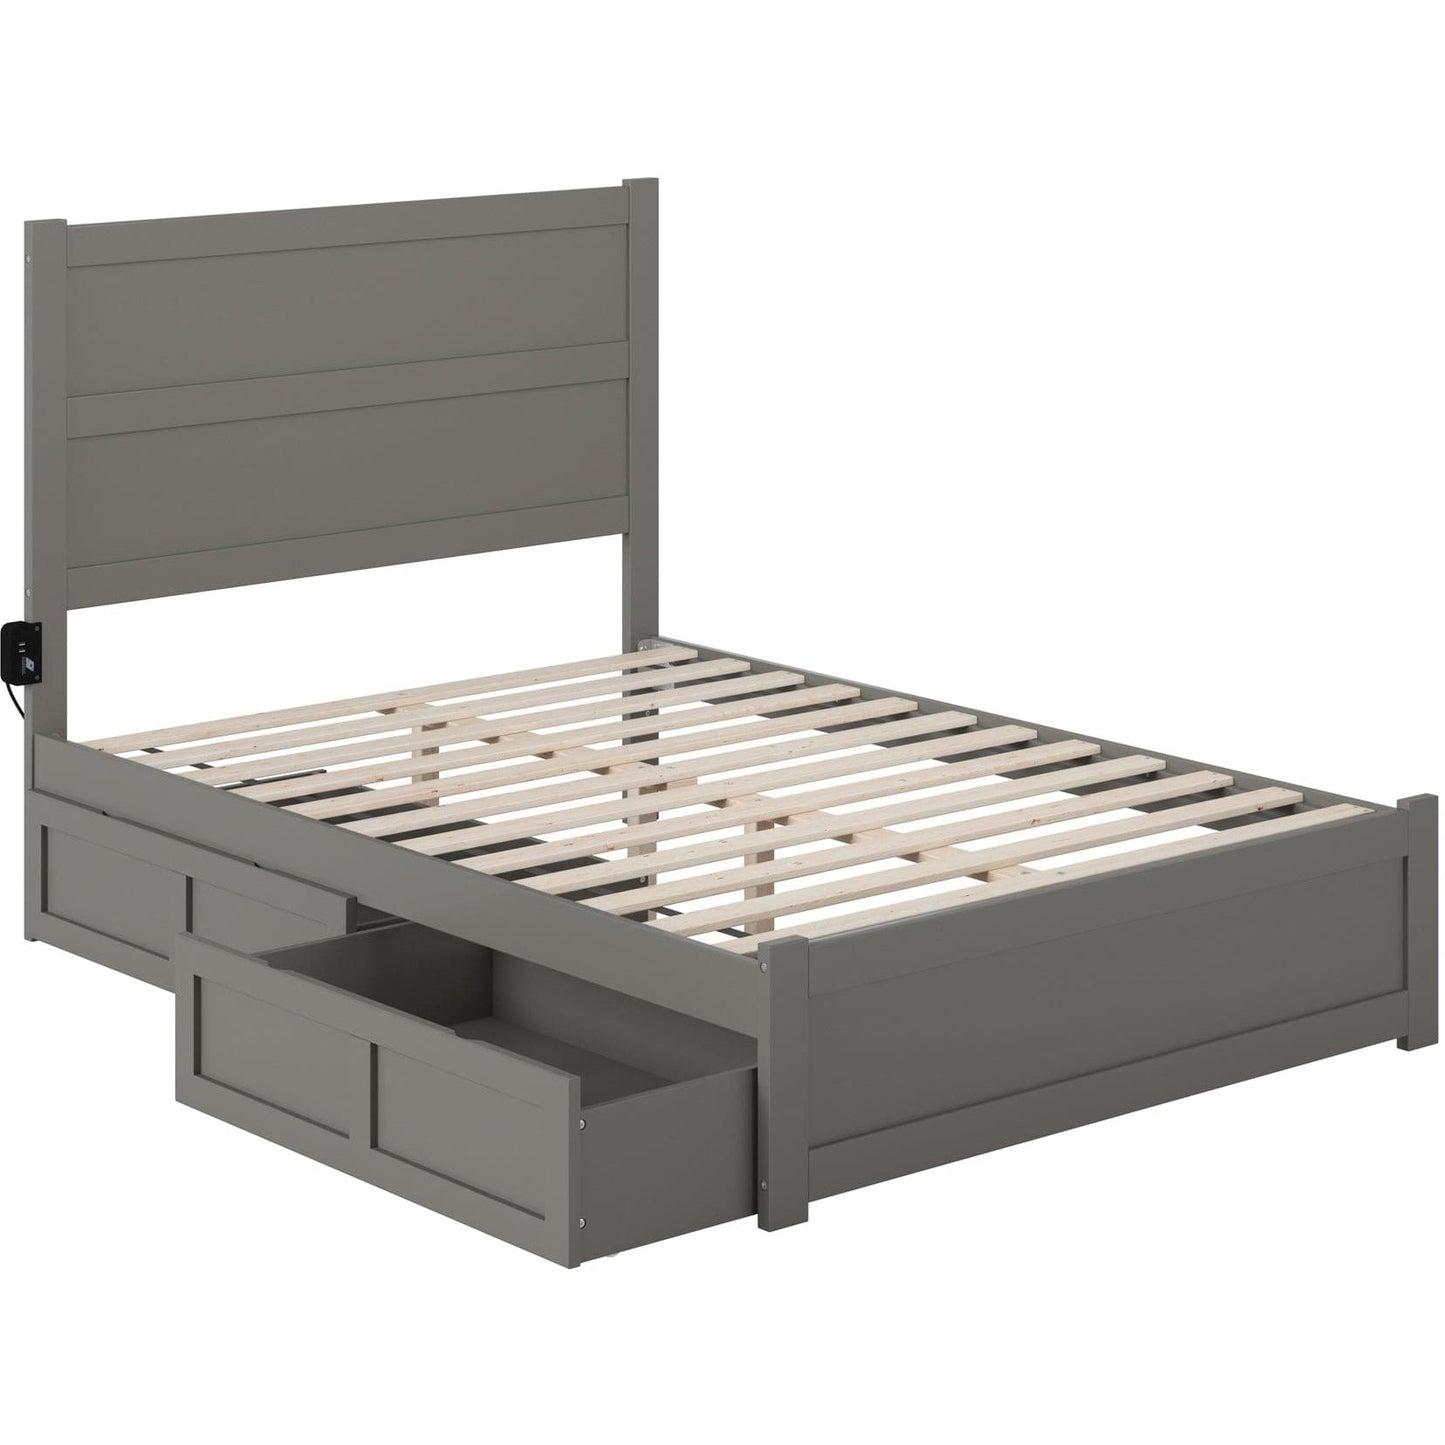 AFI Furnishings NoHo Full Bed with Footboard and 2 Drawers in Grey AG9163339